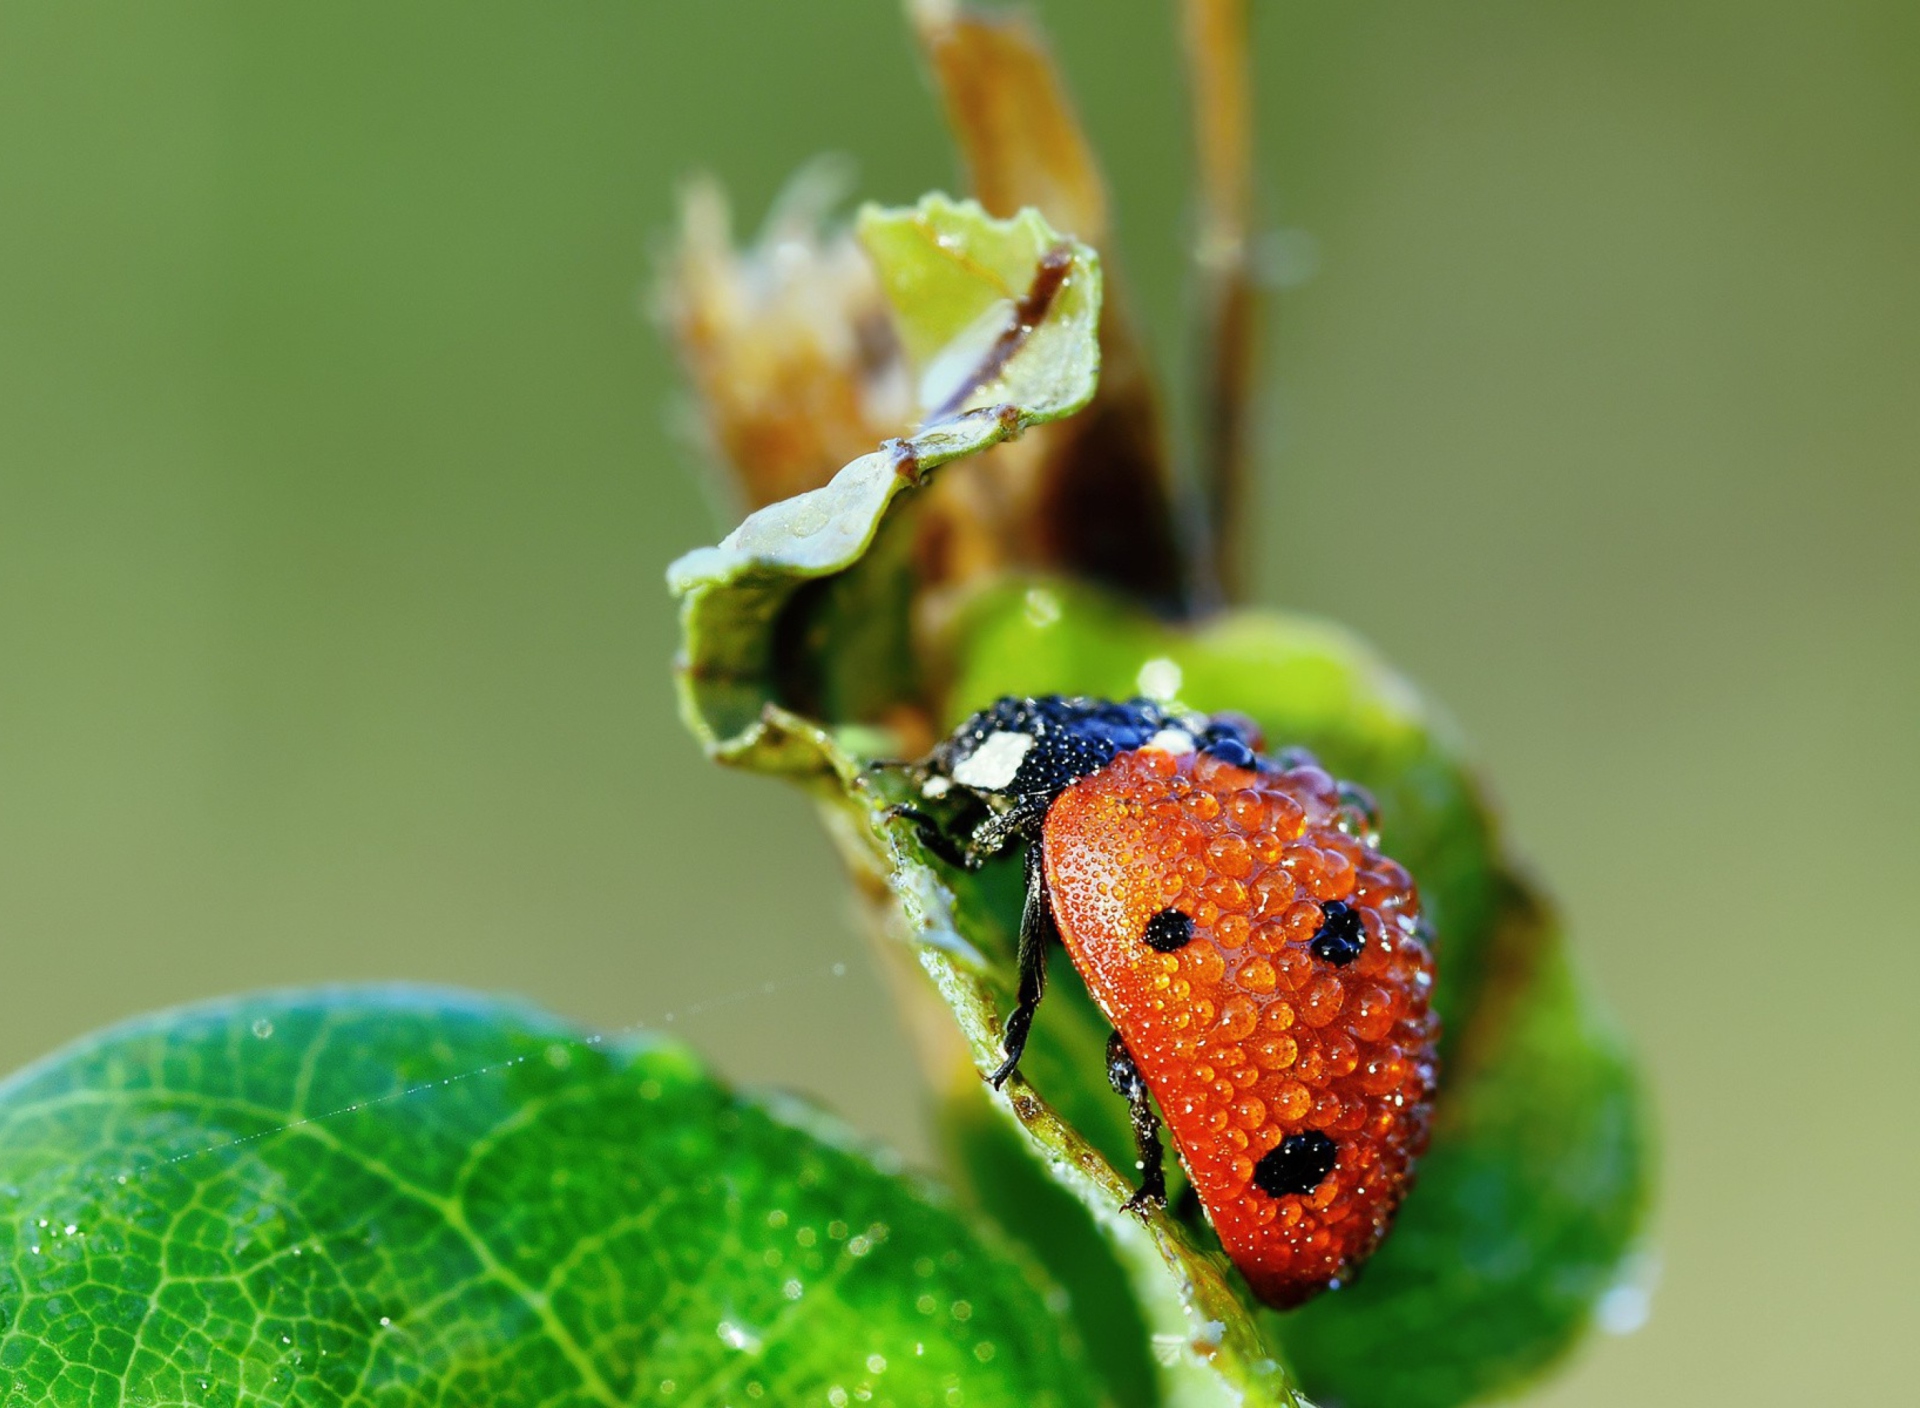 Ladybug Covered With Dew Drops screenshot #1 1920x1408